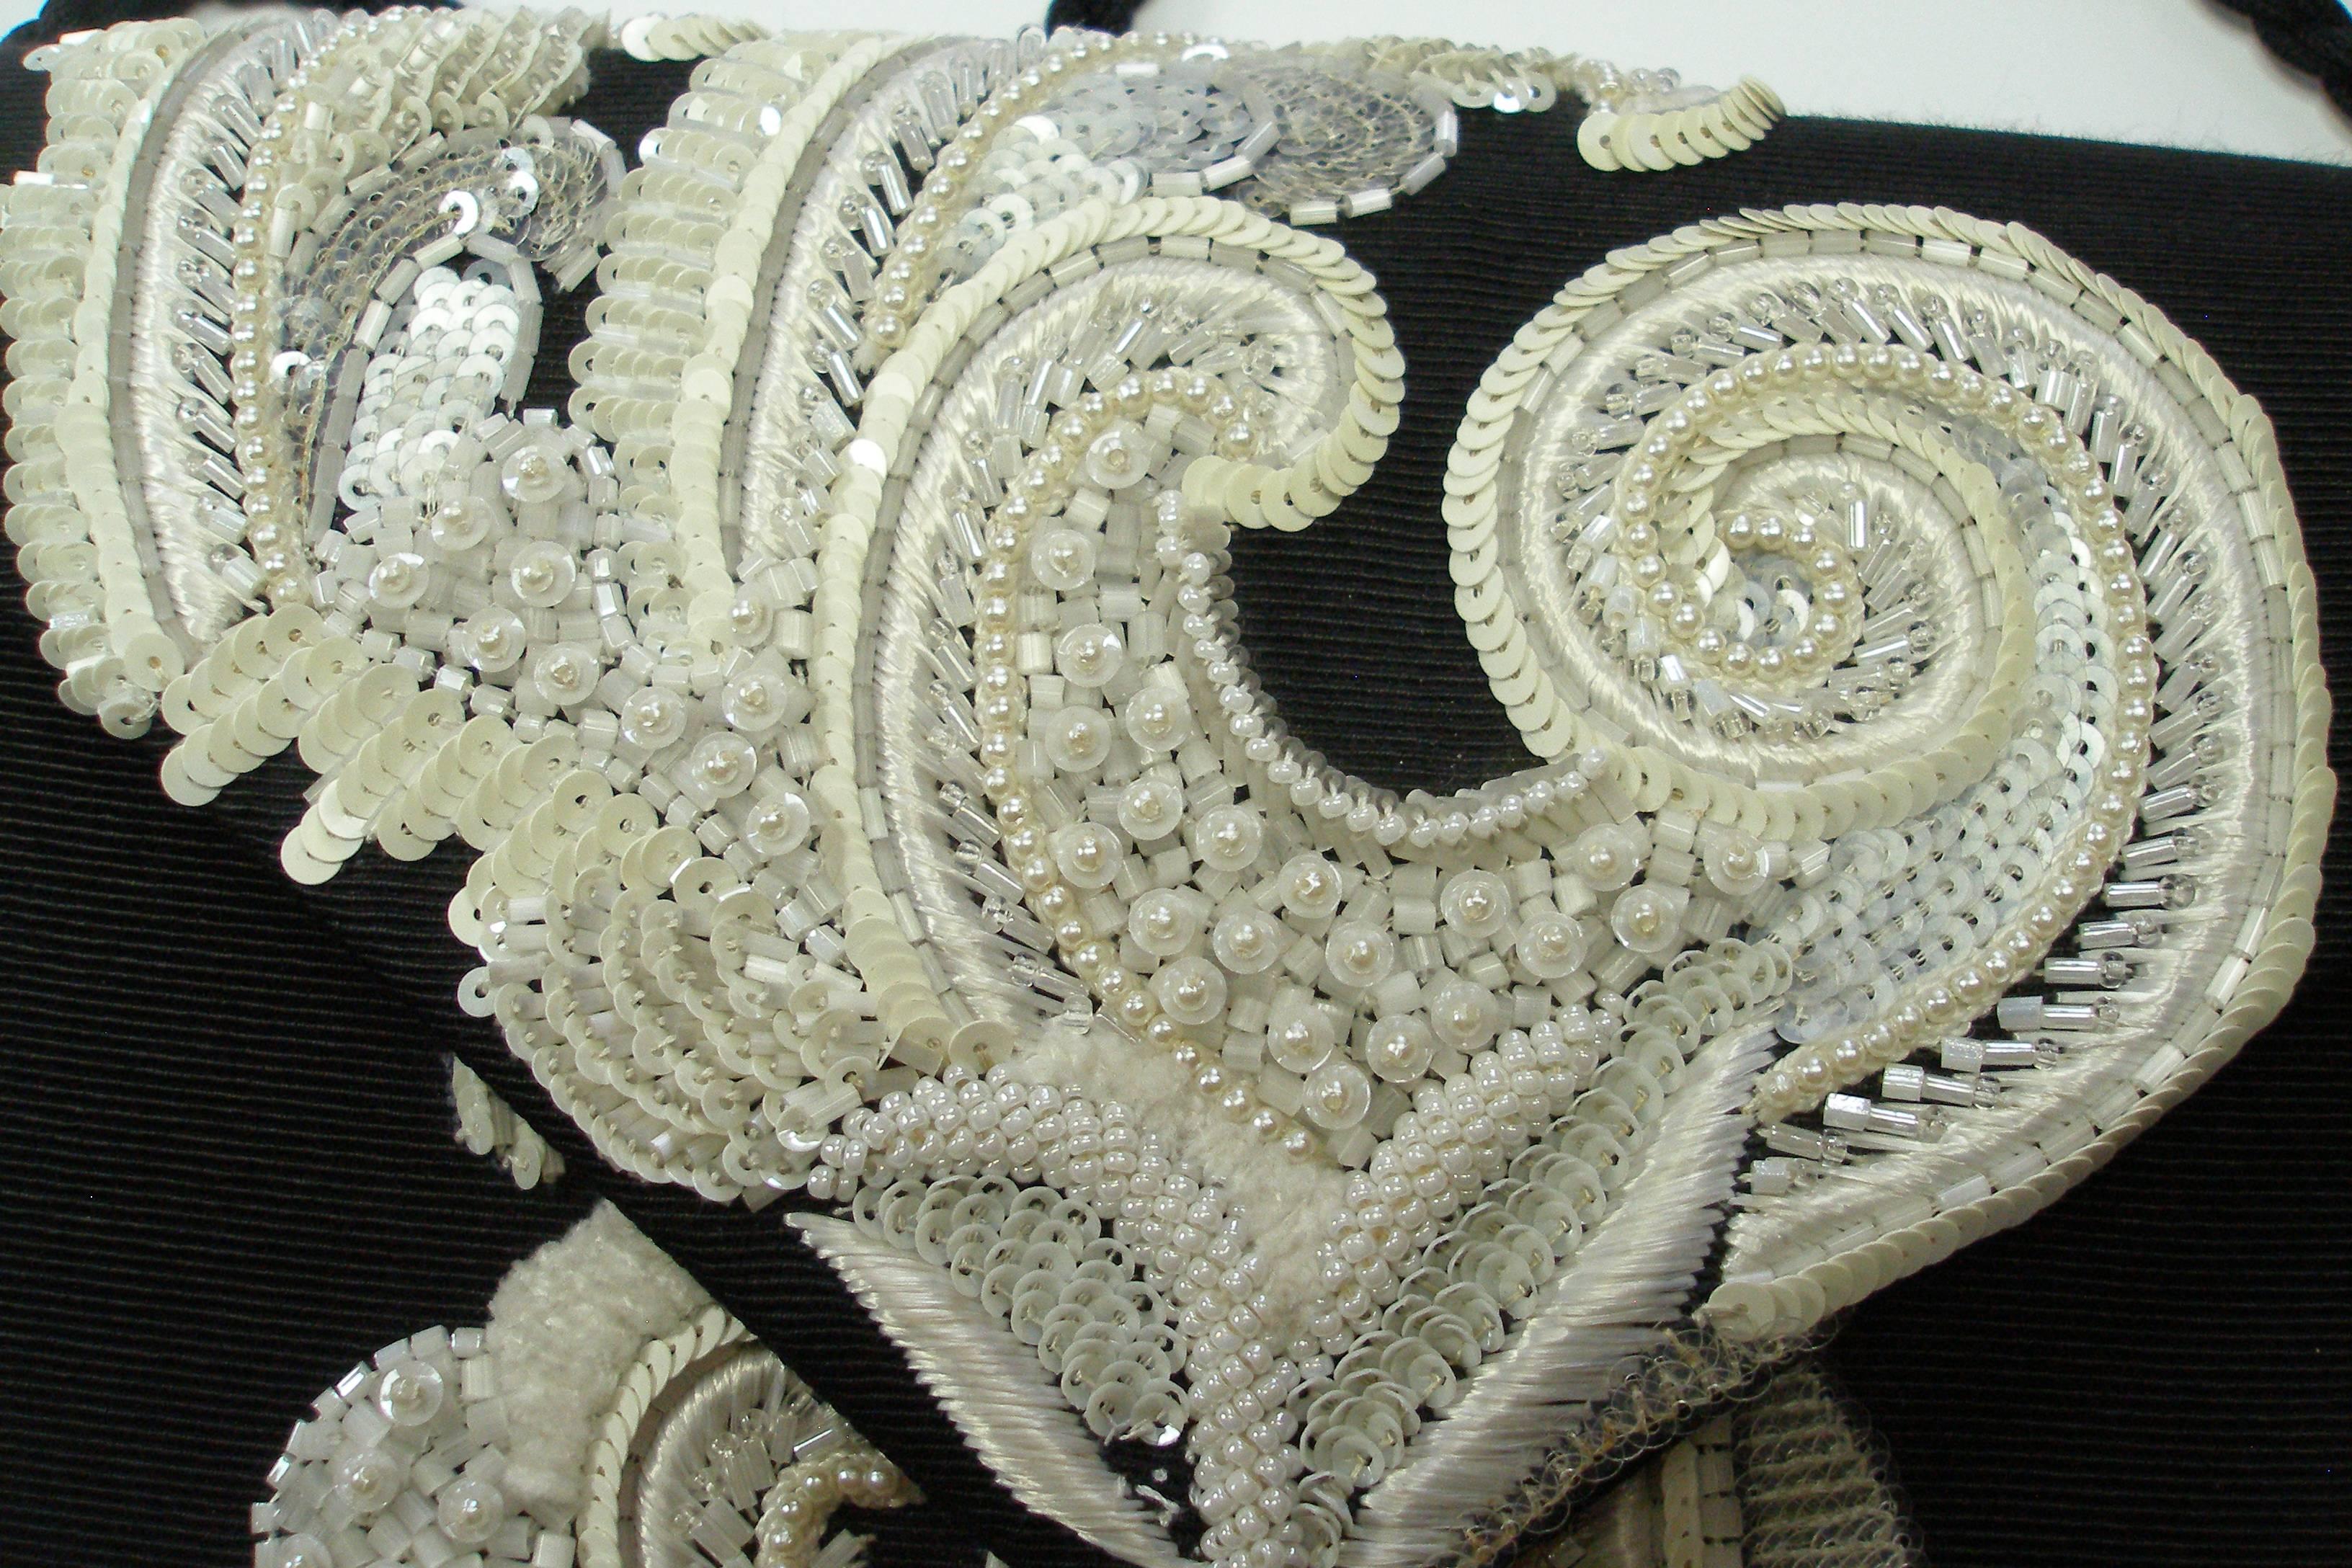 WONDERFULL Vintage Dior Couture Pearls and Sequins Black and White Evening Bag  5